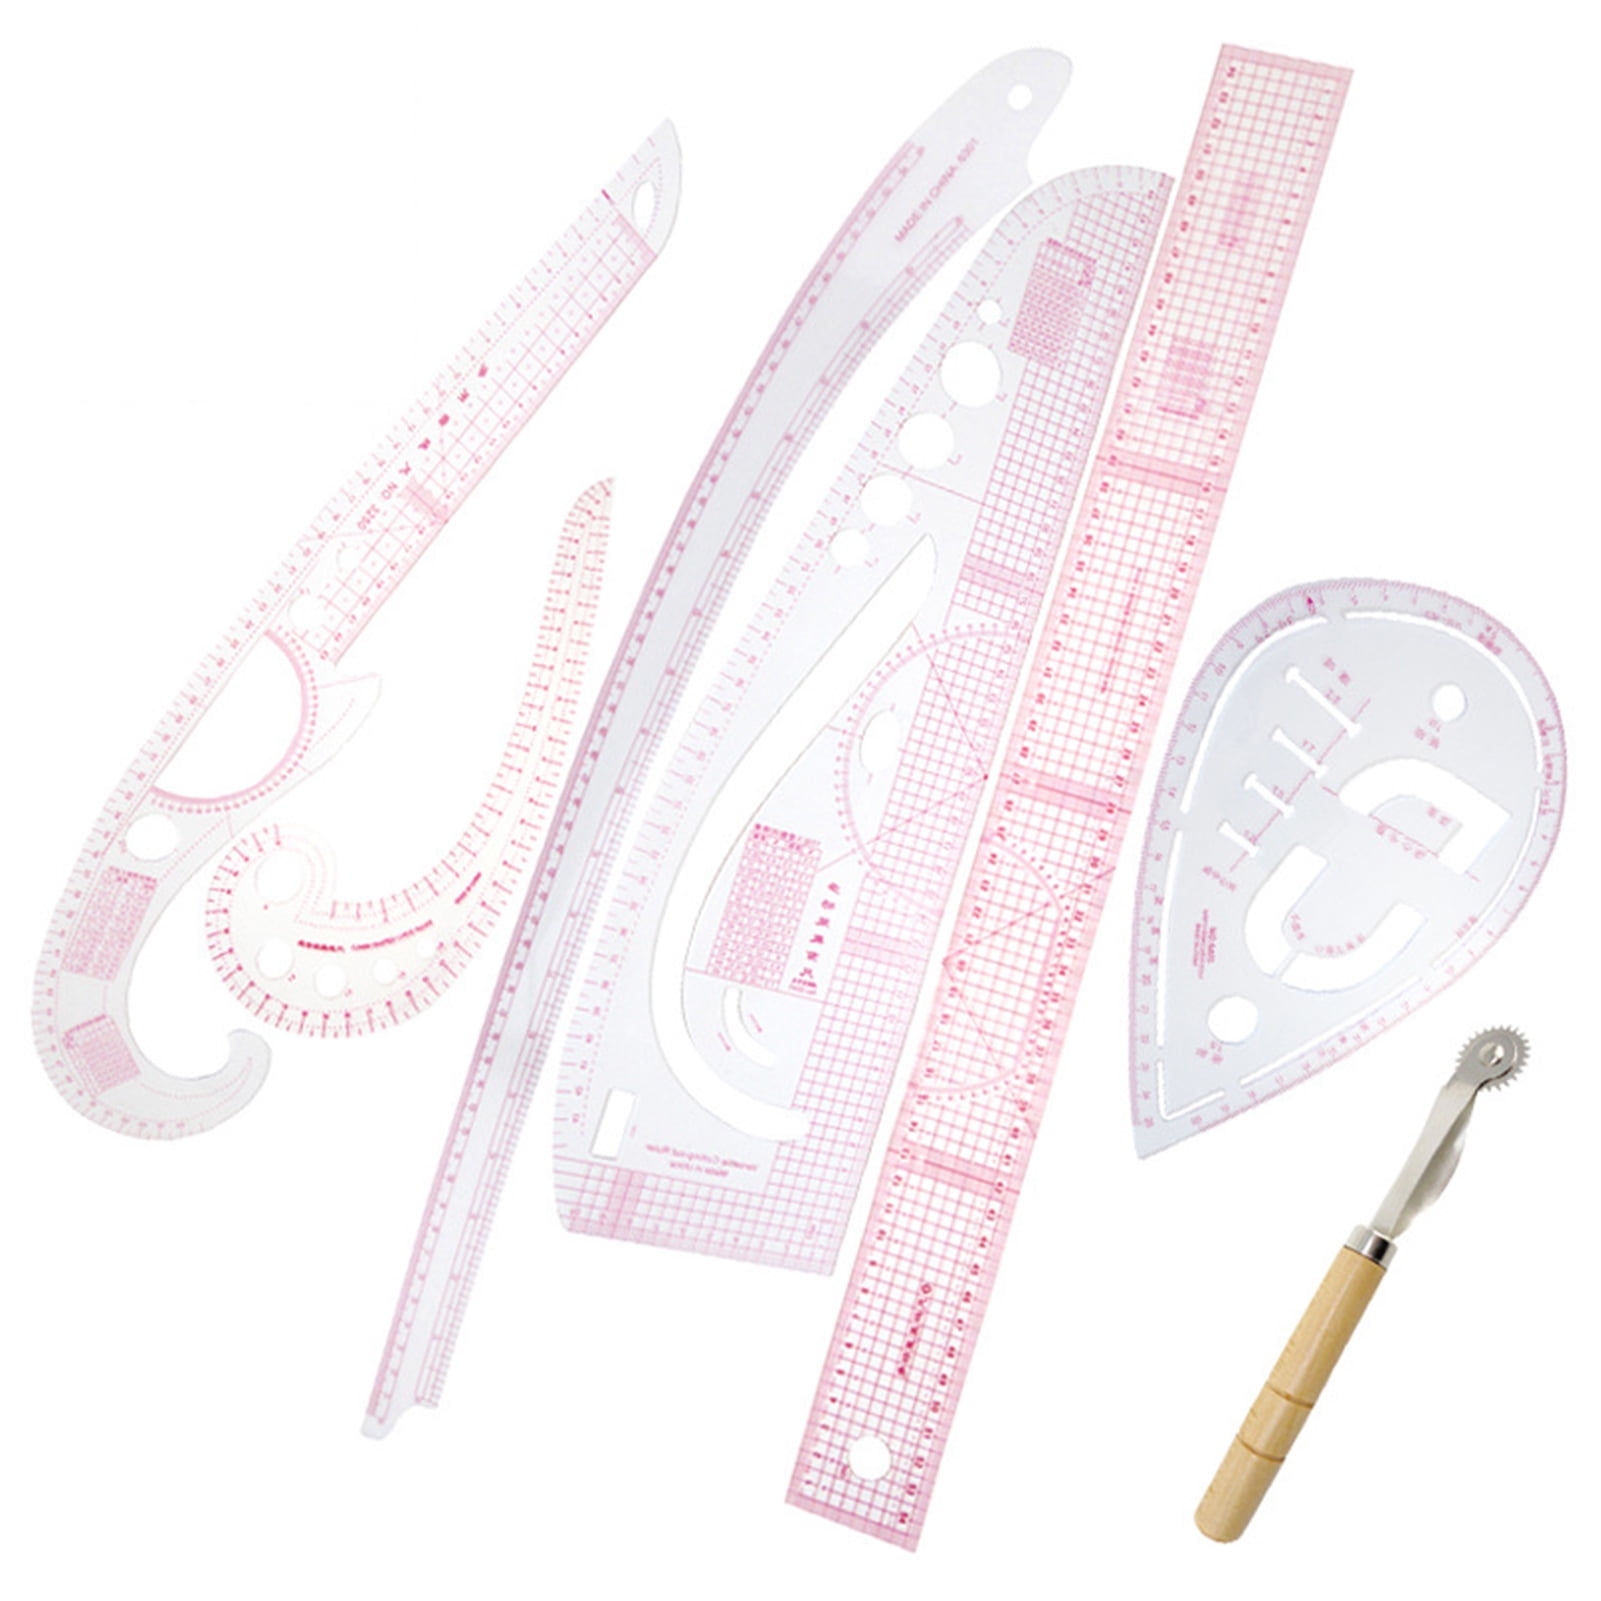 Sewing Flexible Curve Ruler Durable Stitching Measuring Tools Diy Crafts Supply 